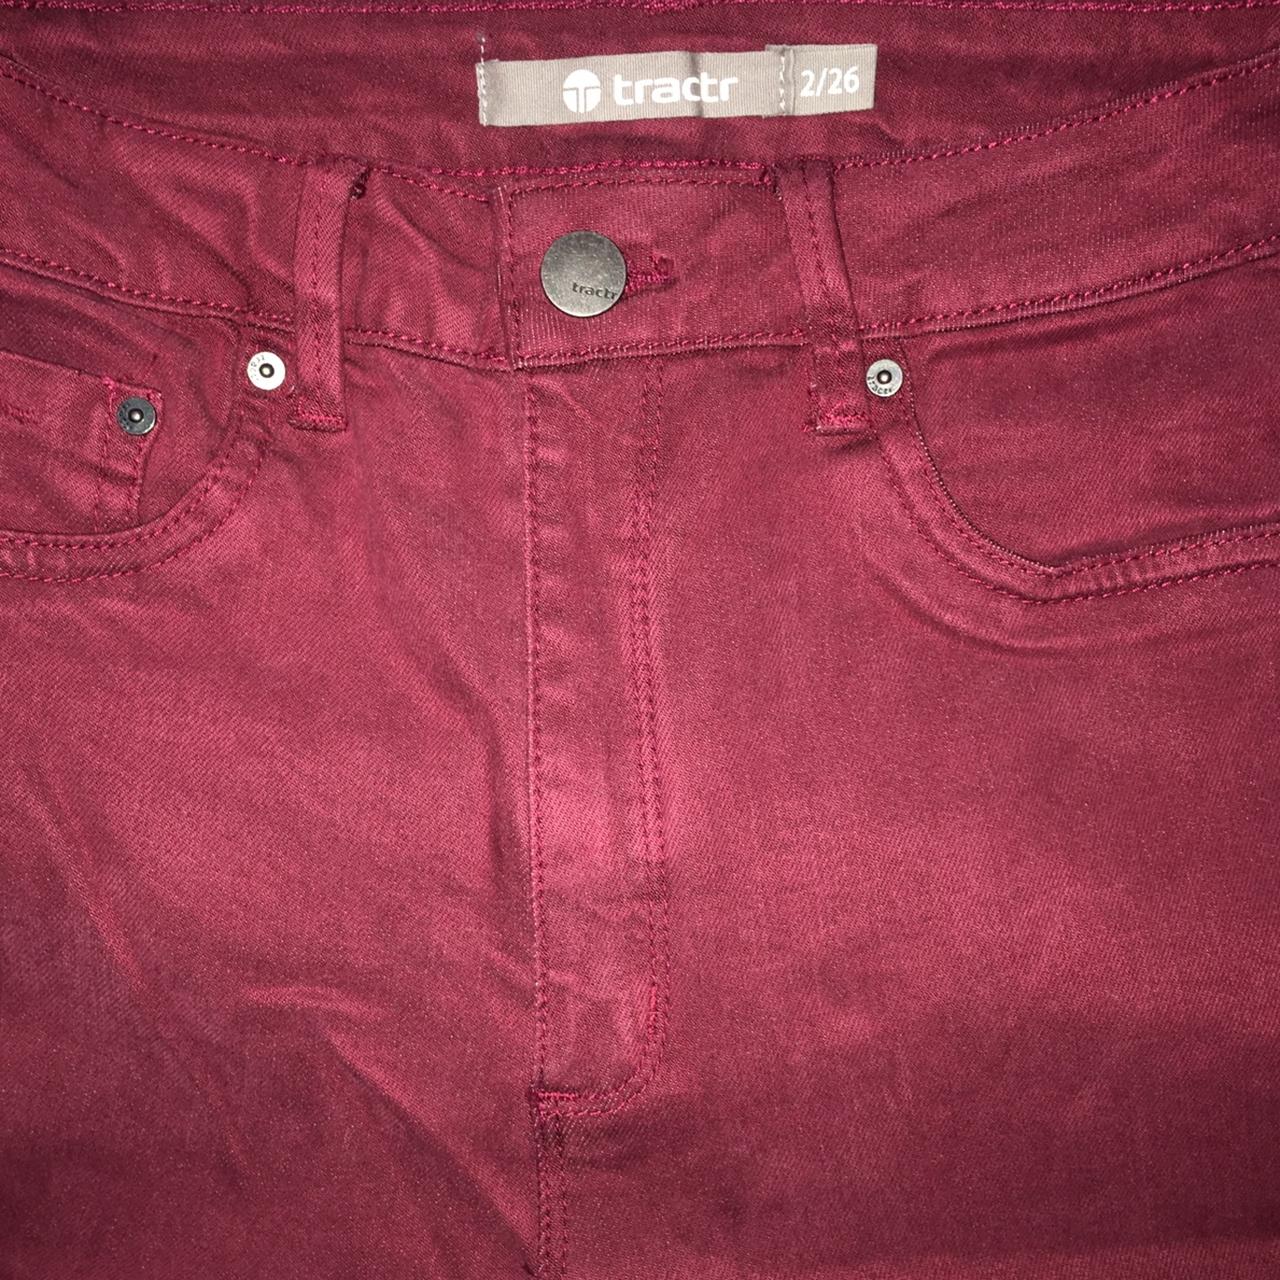 Trapstar Women's Burgundy and Red Jeans | Depop